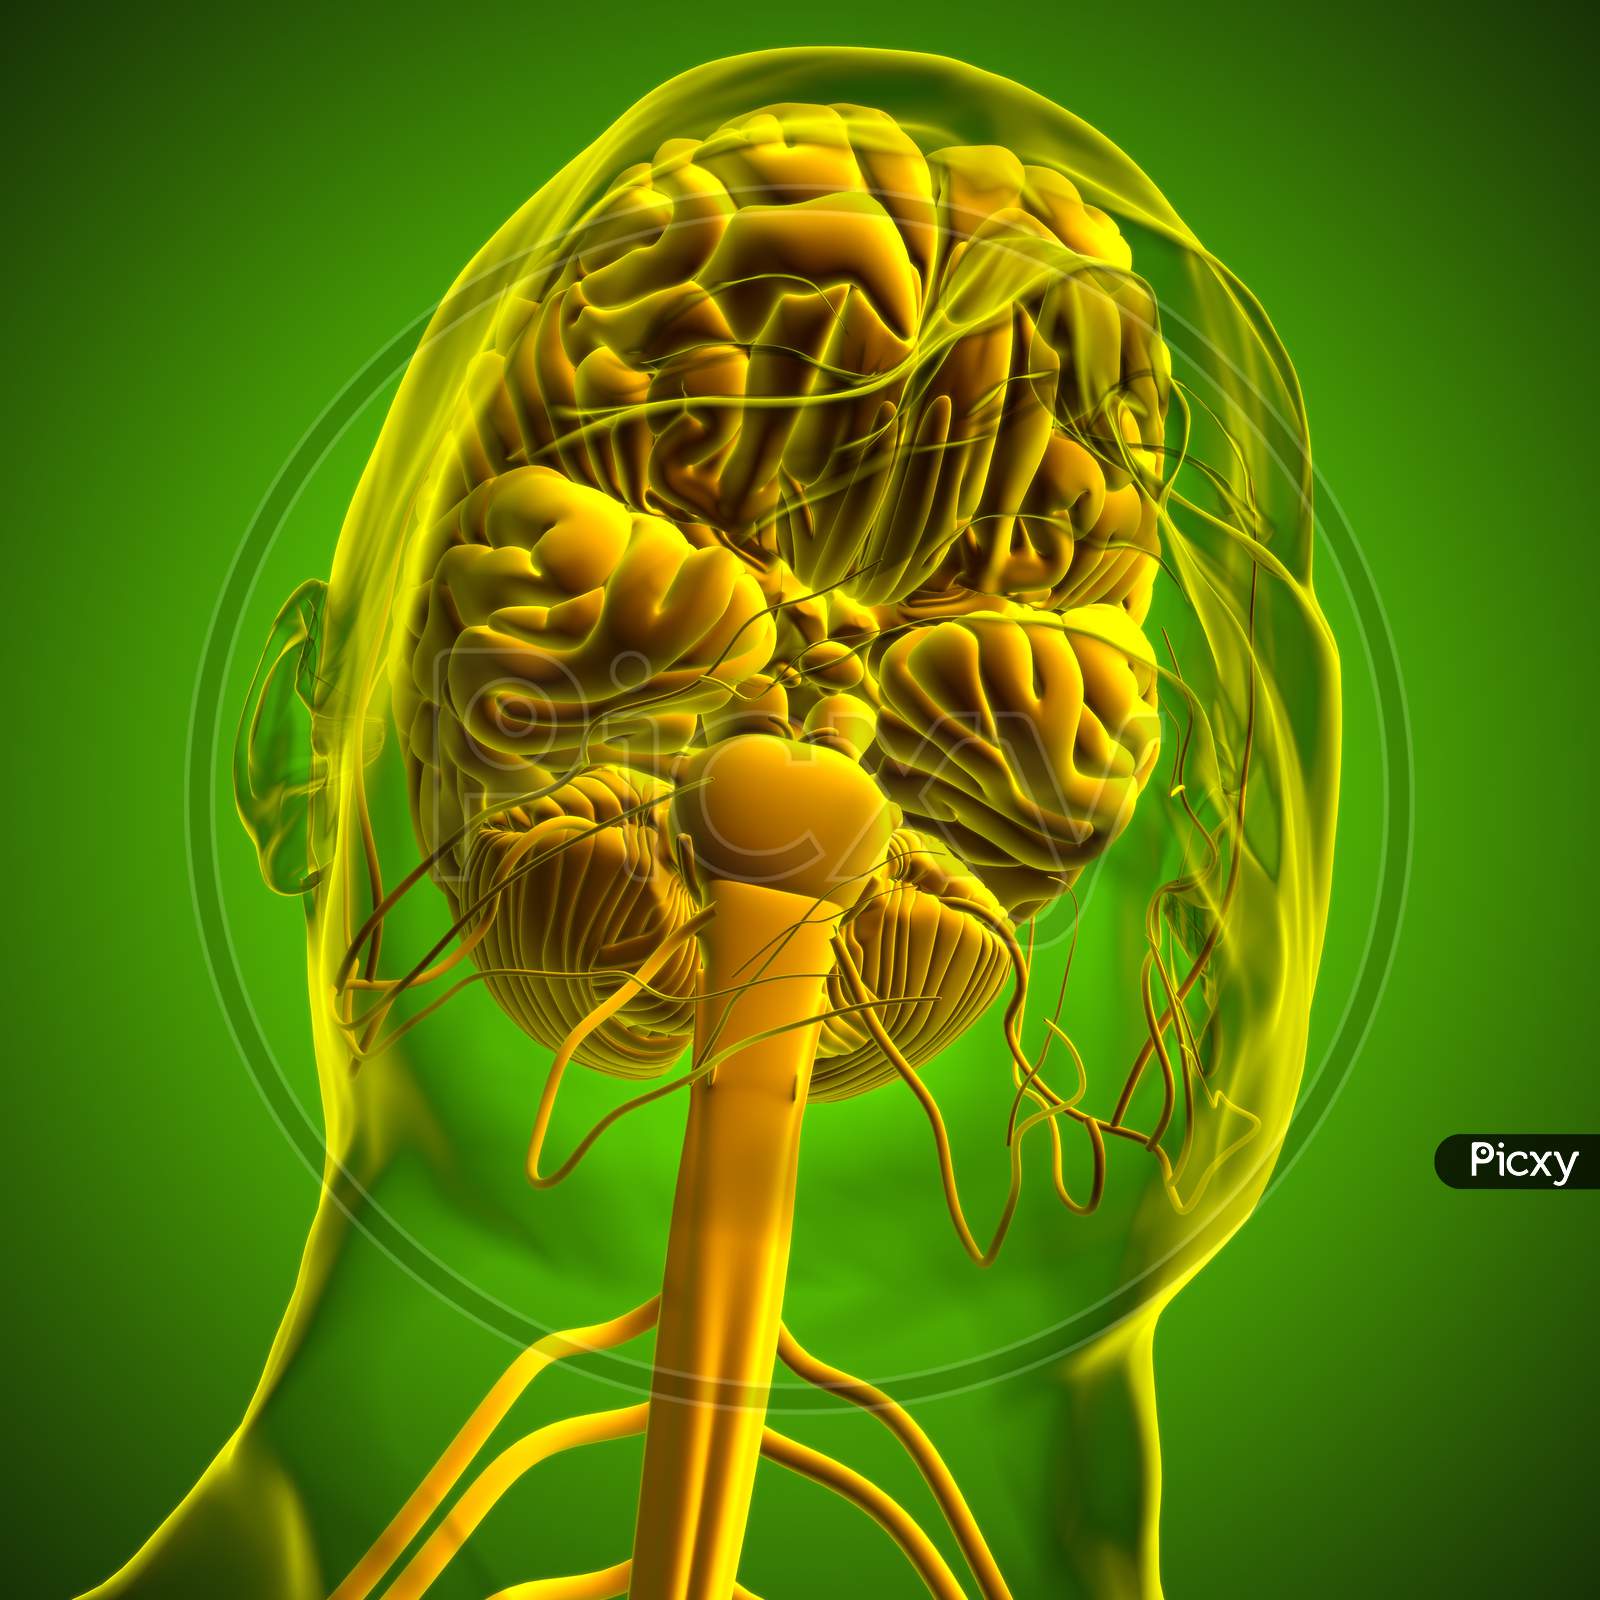 Human Brain Anatomy For Medical Concept 3D Rendering